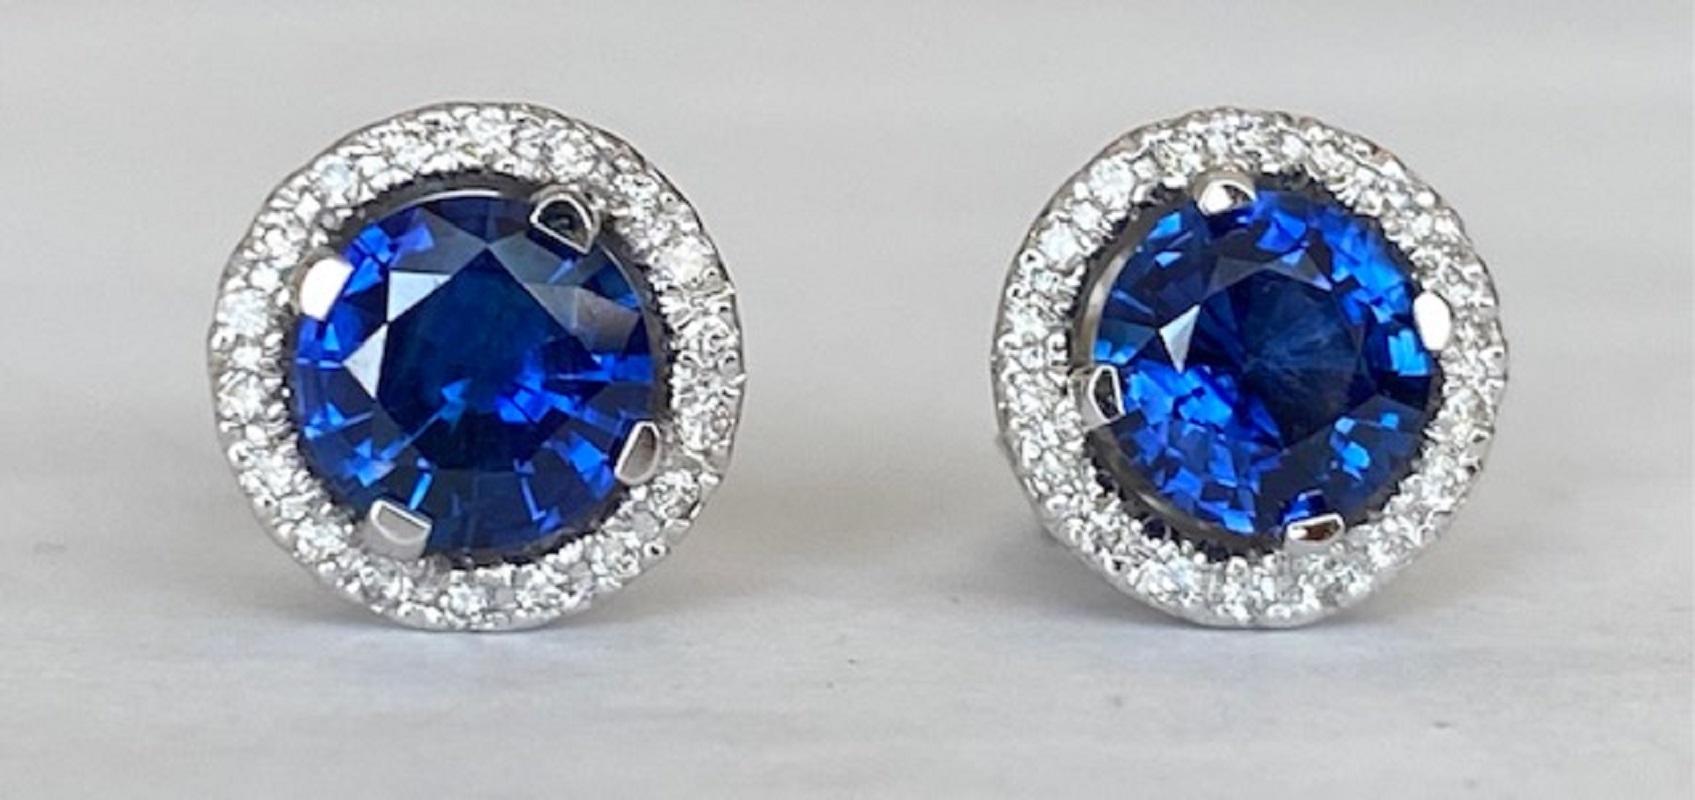 Ear studs in white gold, offered in new condition, with two brilliant cut sapphires of approx. 1.62 ct combined! The sapphires have rich Vivid/Deep blue colour! The stones are surrounded by an entourage of 36 brilliant cut diamonds of approx. 0.40